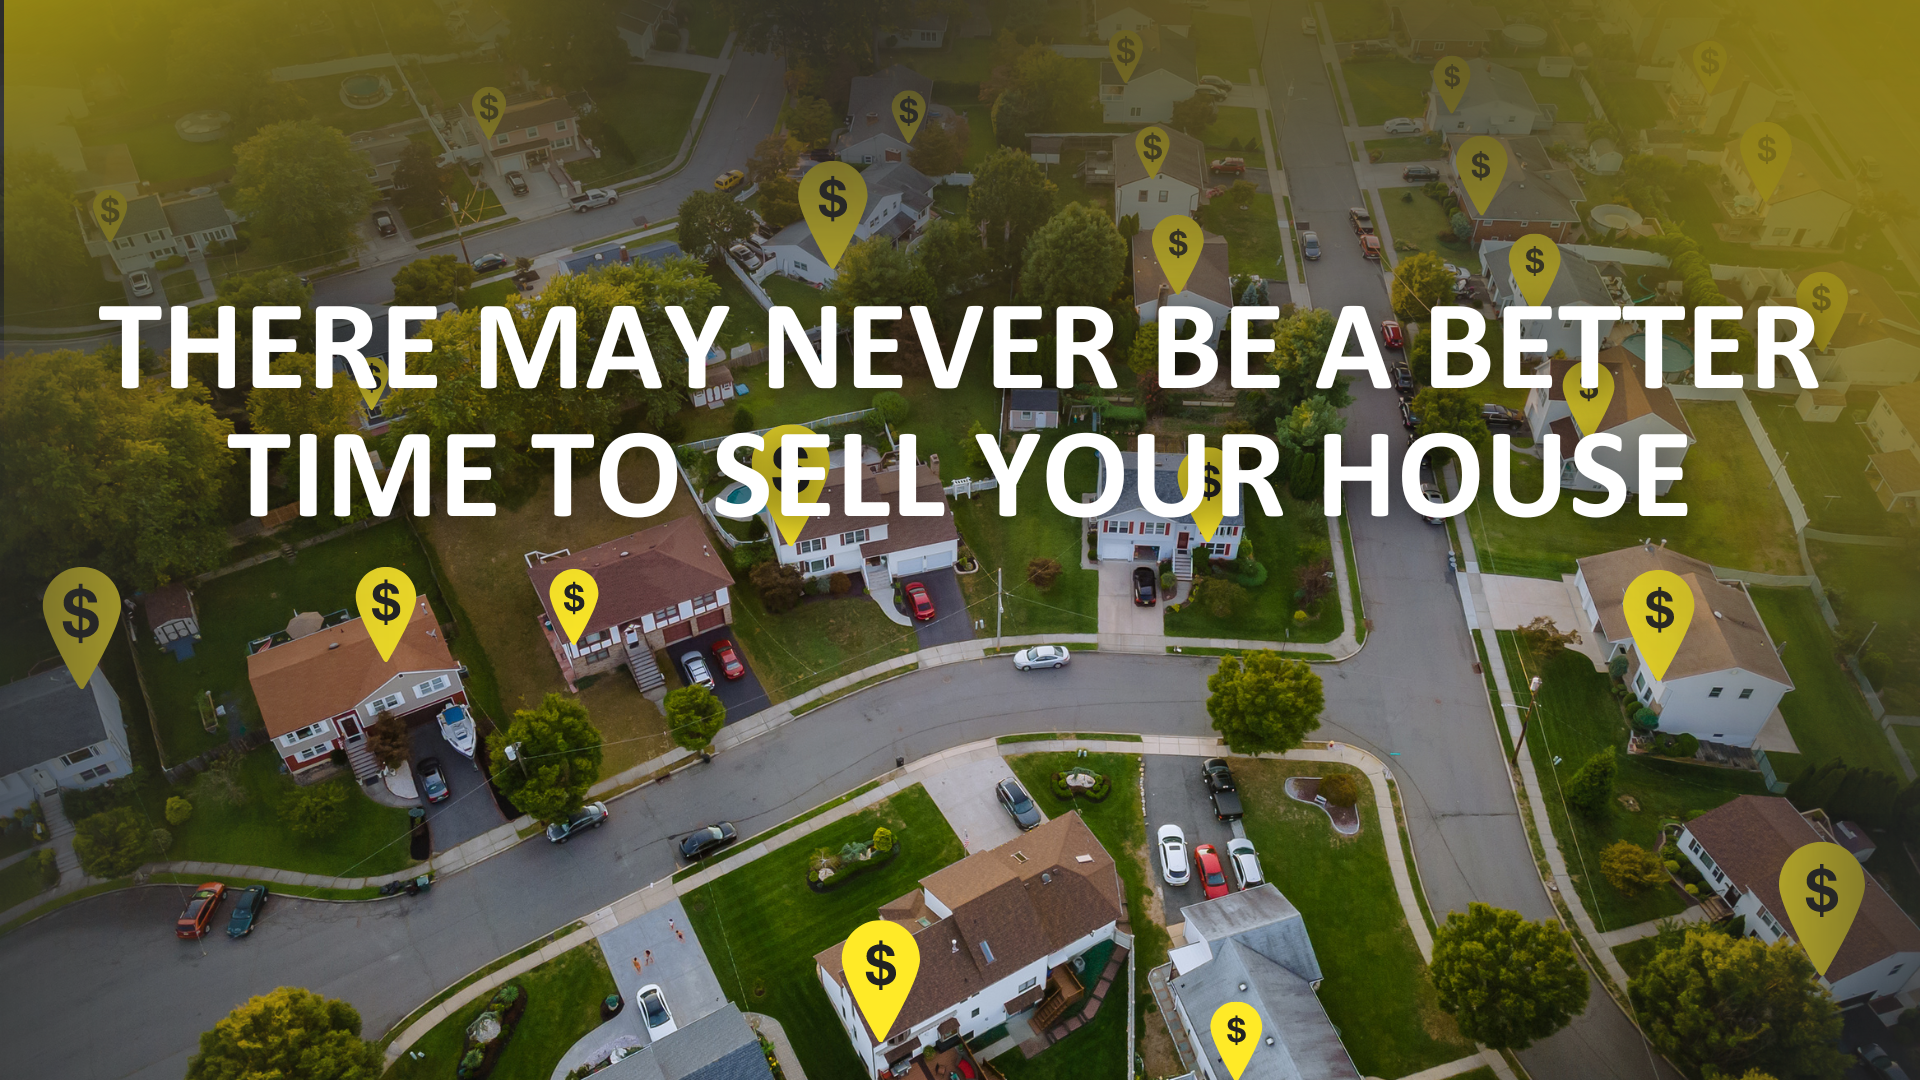 There may never be a better time to sell your house